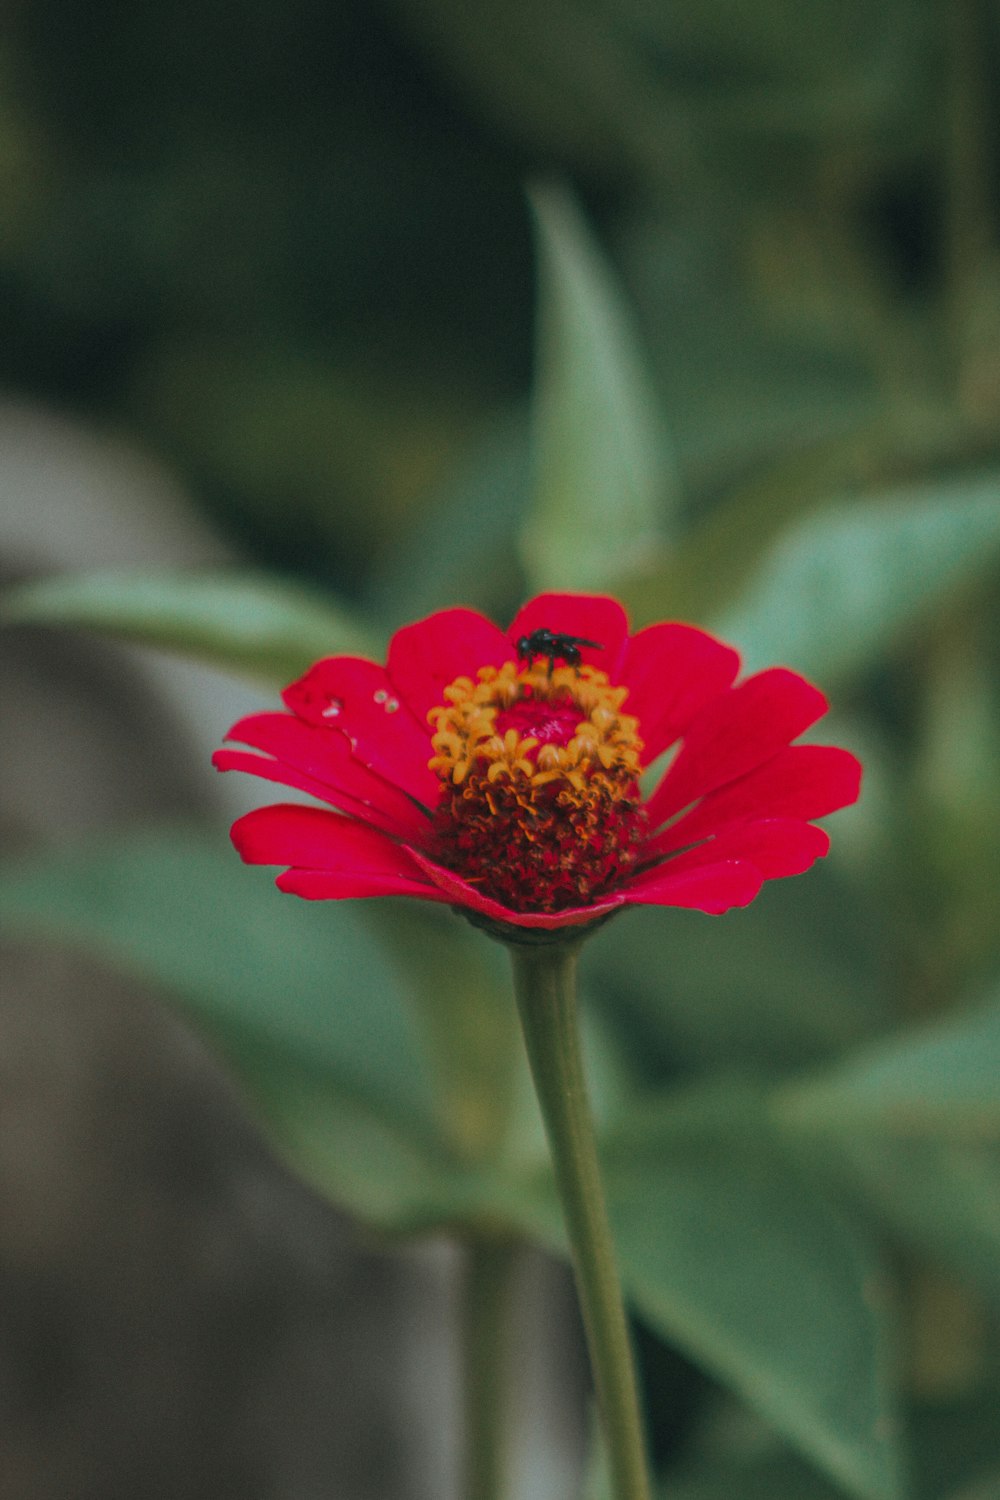 a red flower with a yellow center in a garden